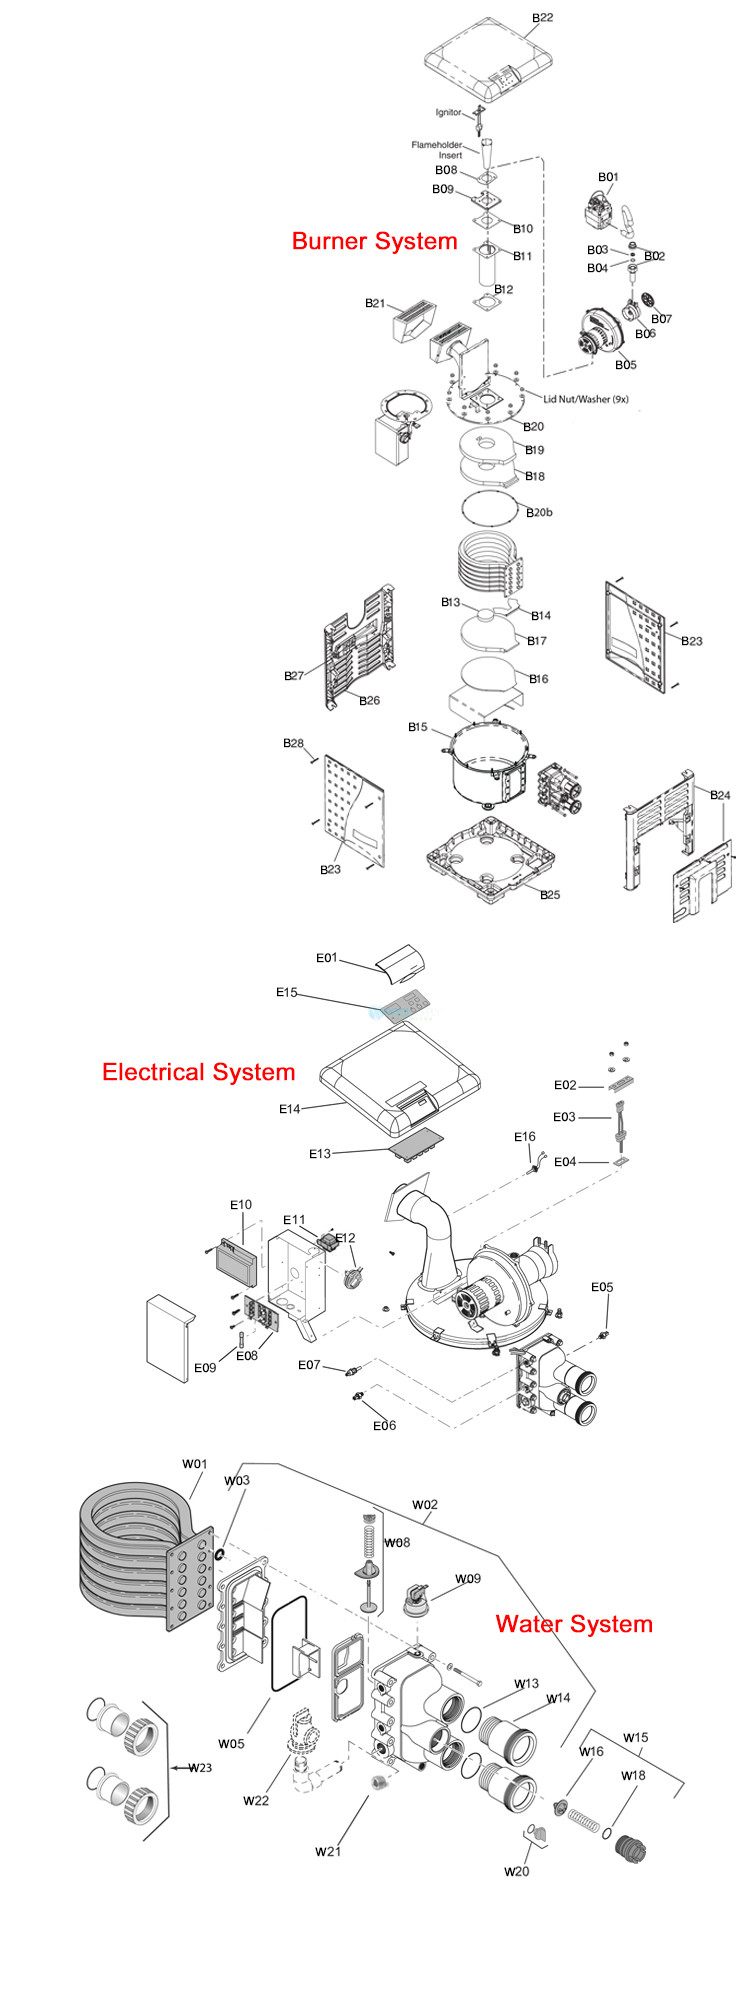 Pentair MasterTemp Low NOx Commercial Swimming Pool Heater - Electronic Ignition - Propane - 250,000 BTU ASME - 460772 Parts Schematic